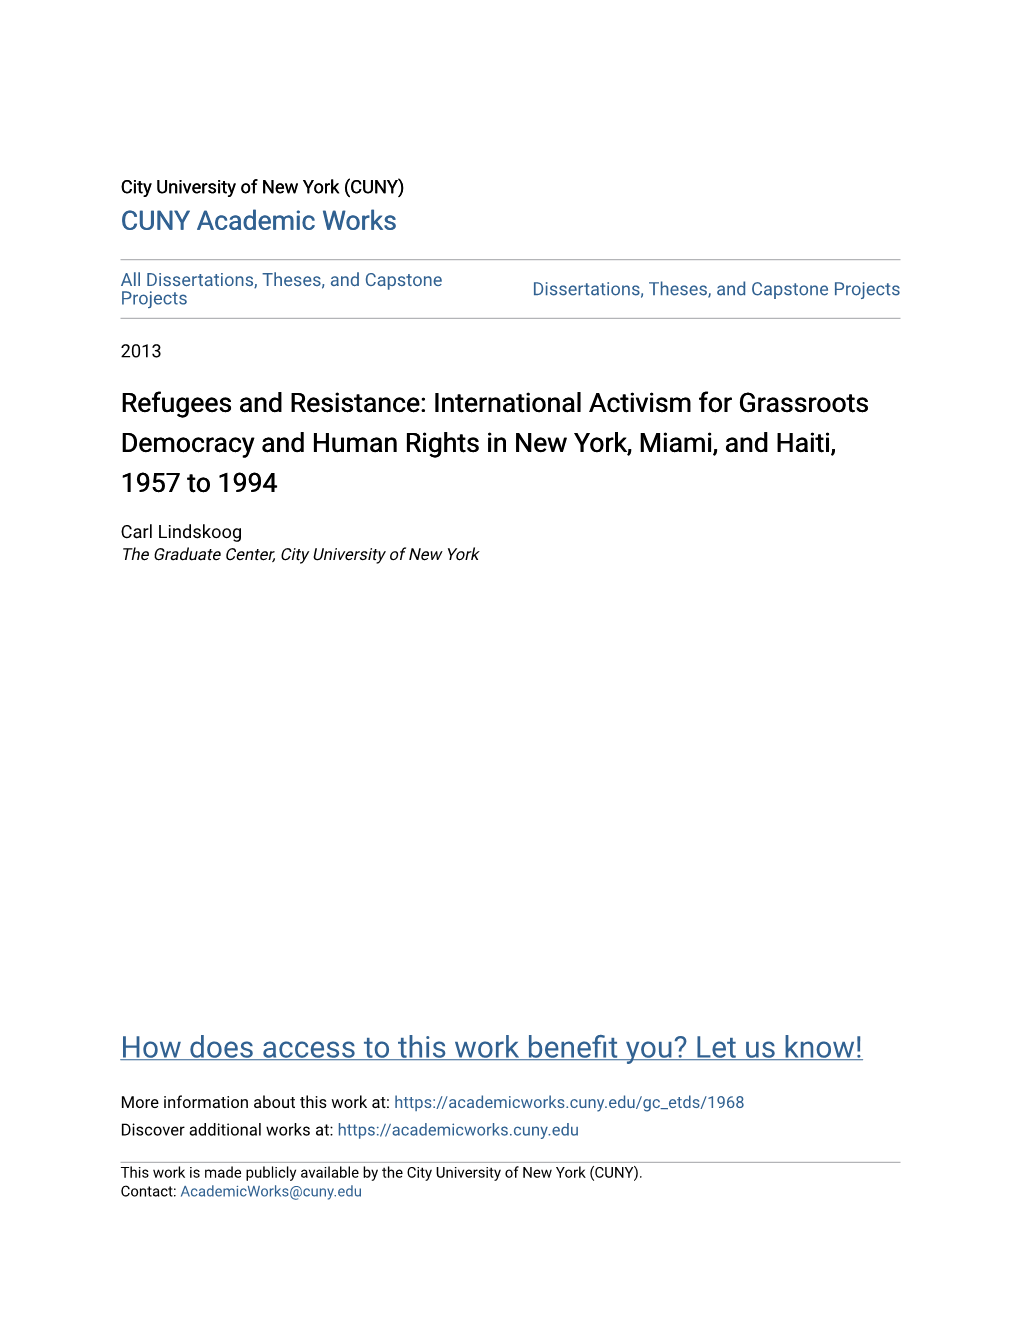 International Activism for Grassroots Democracy and Human Rights in New York, Miami, and Haiti, 1957 to 1994